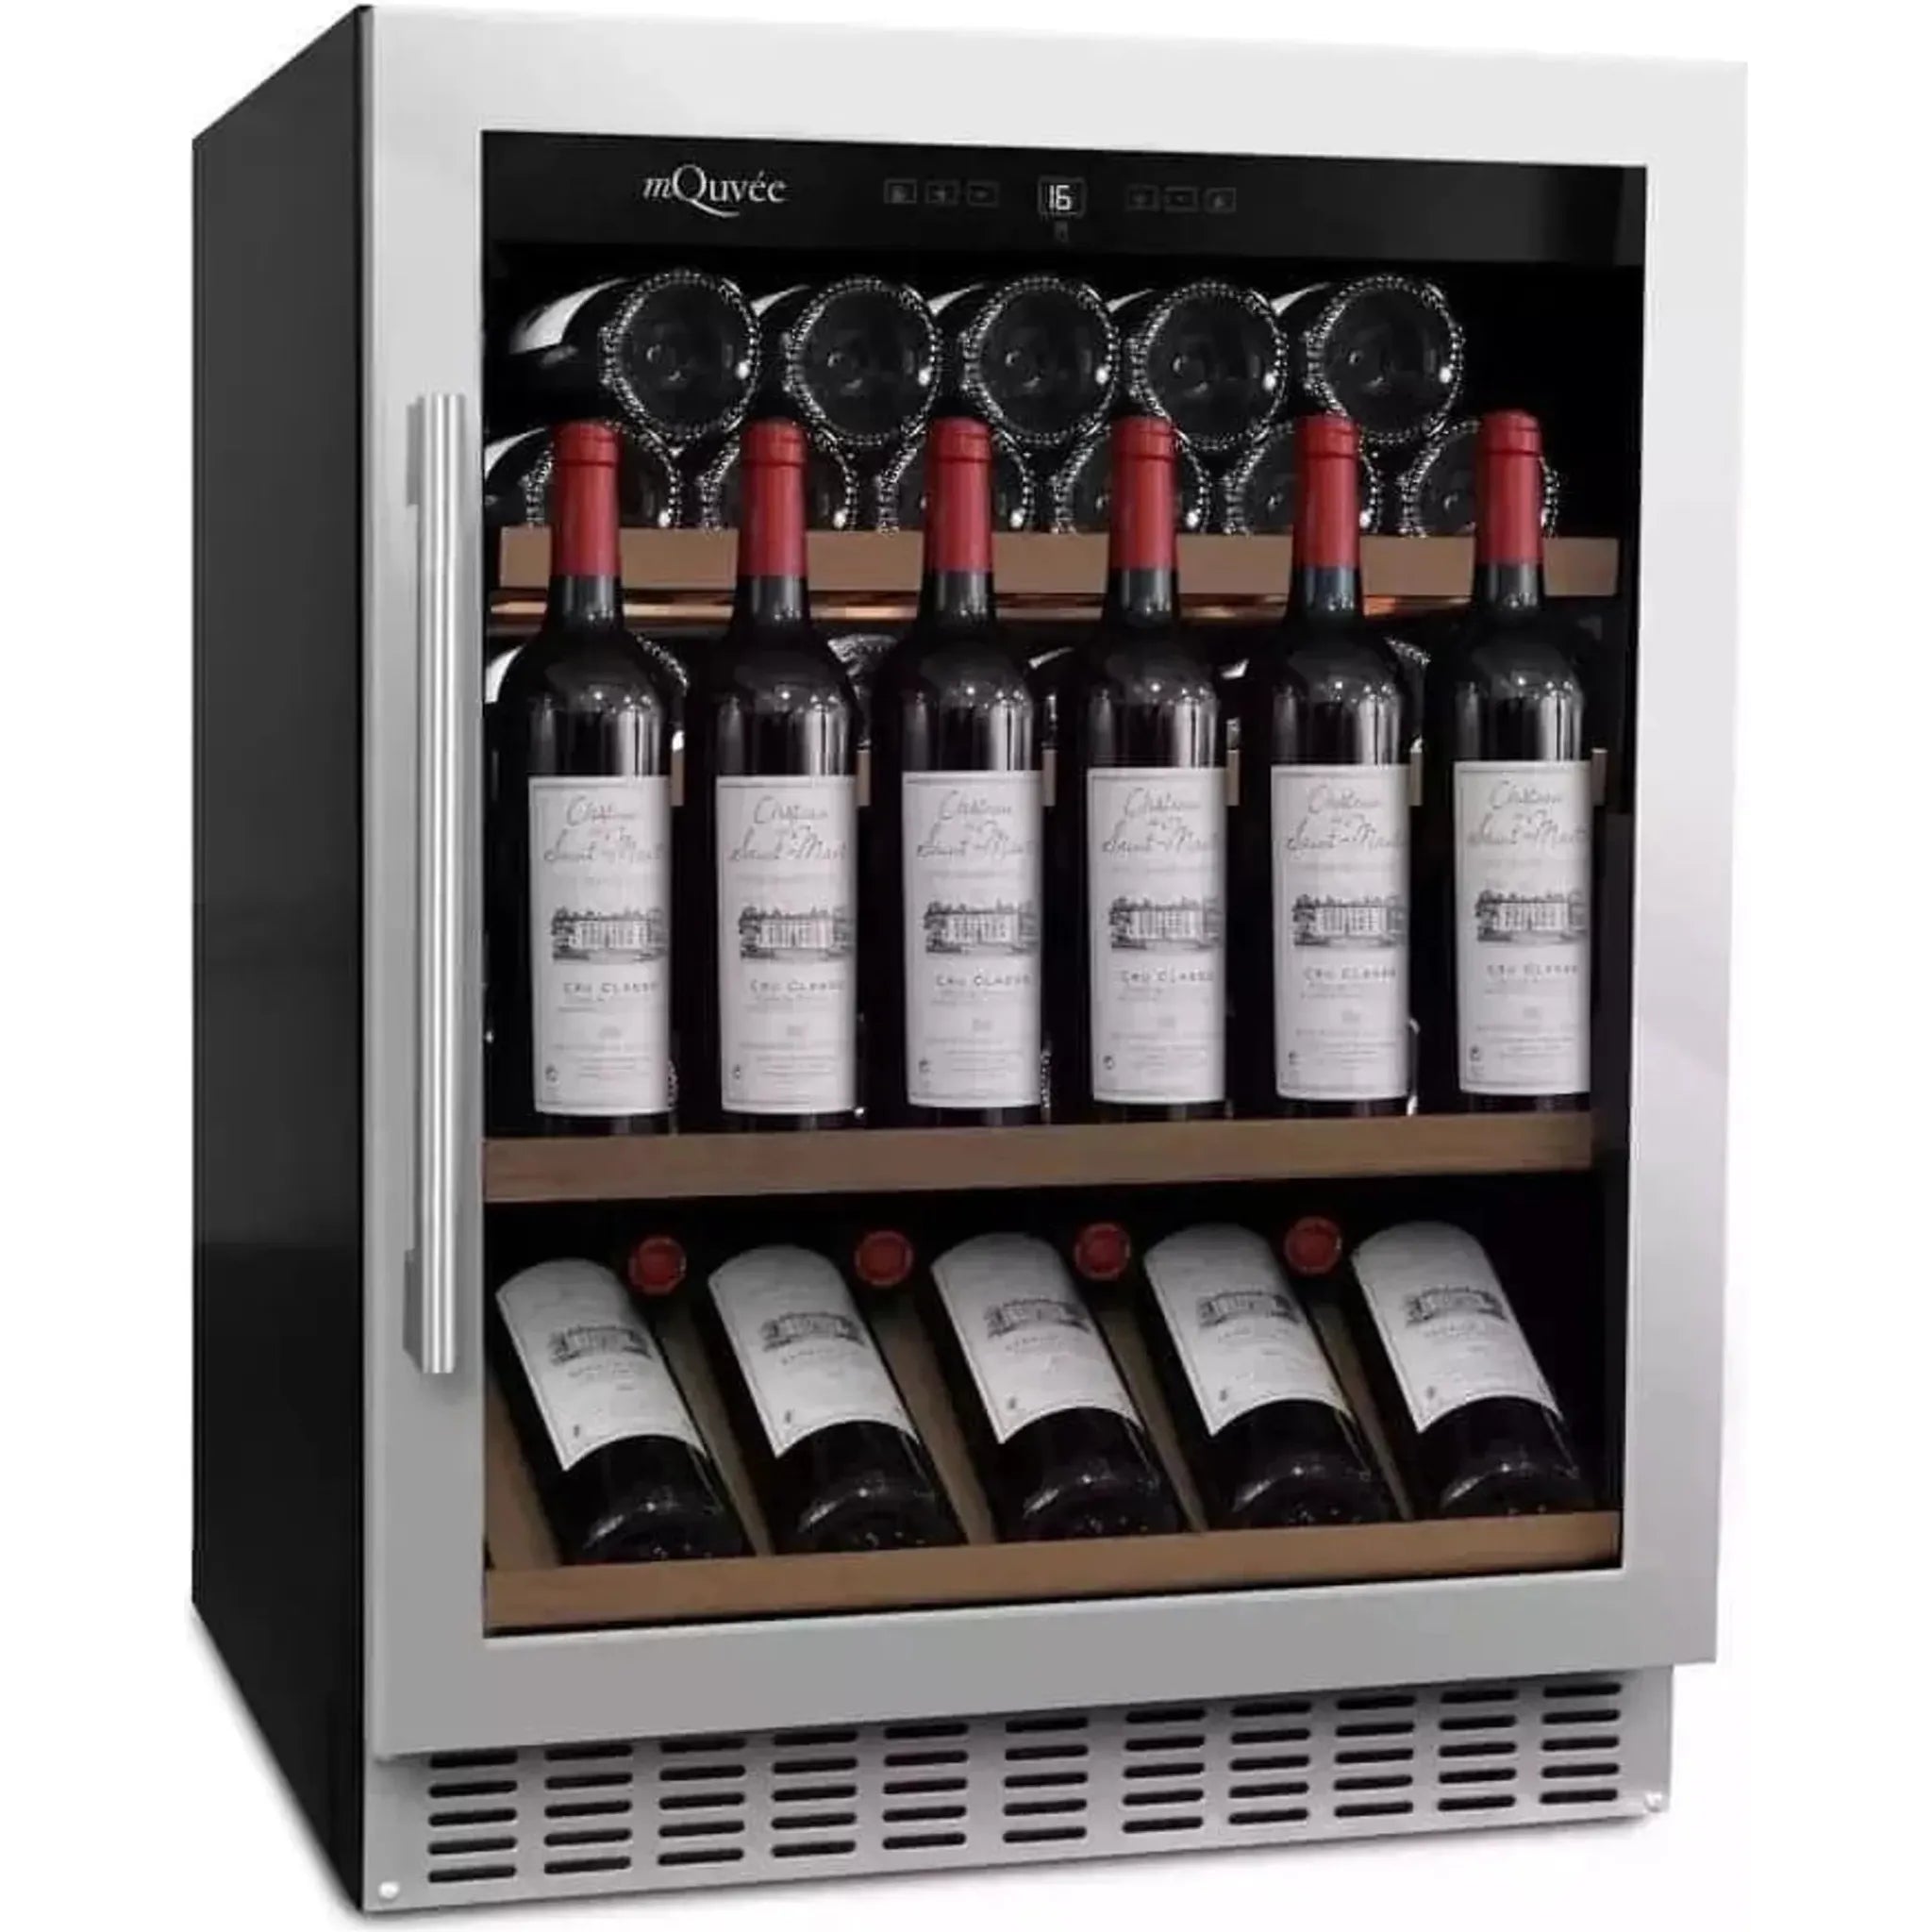 mQuvée - 600mm - Undercounter Wine Fridge - WineCave 700 60S - Label View